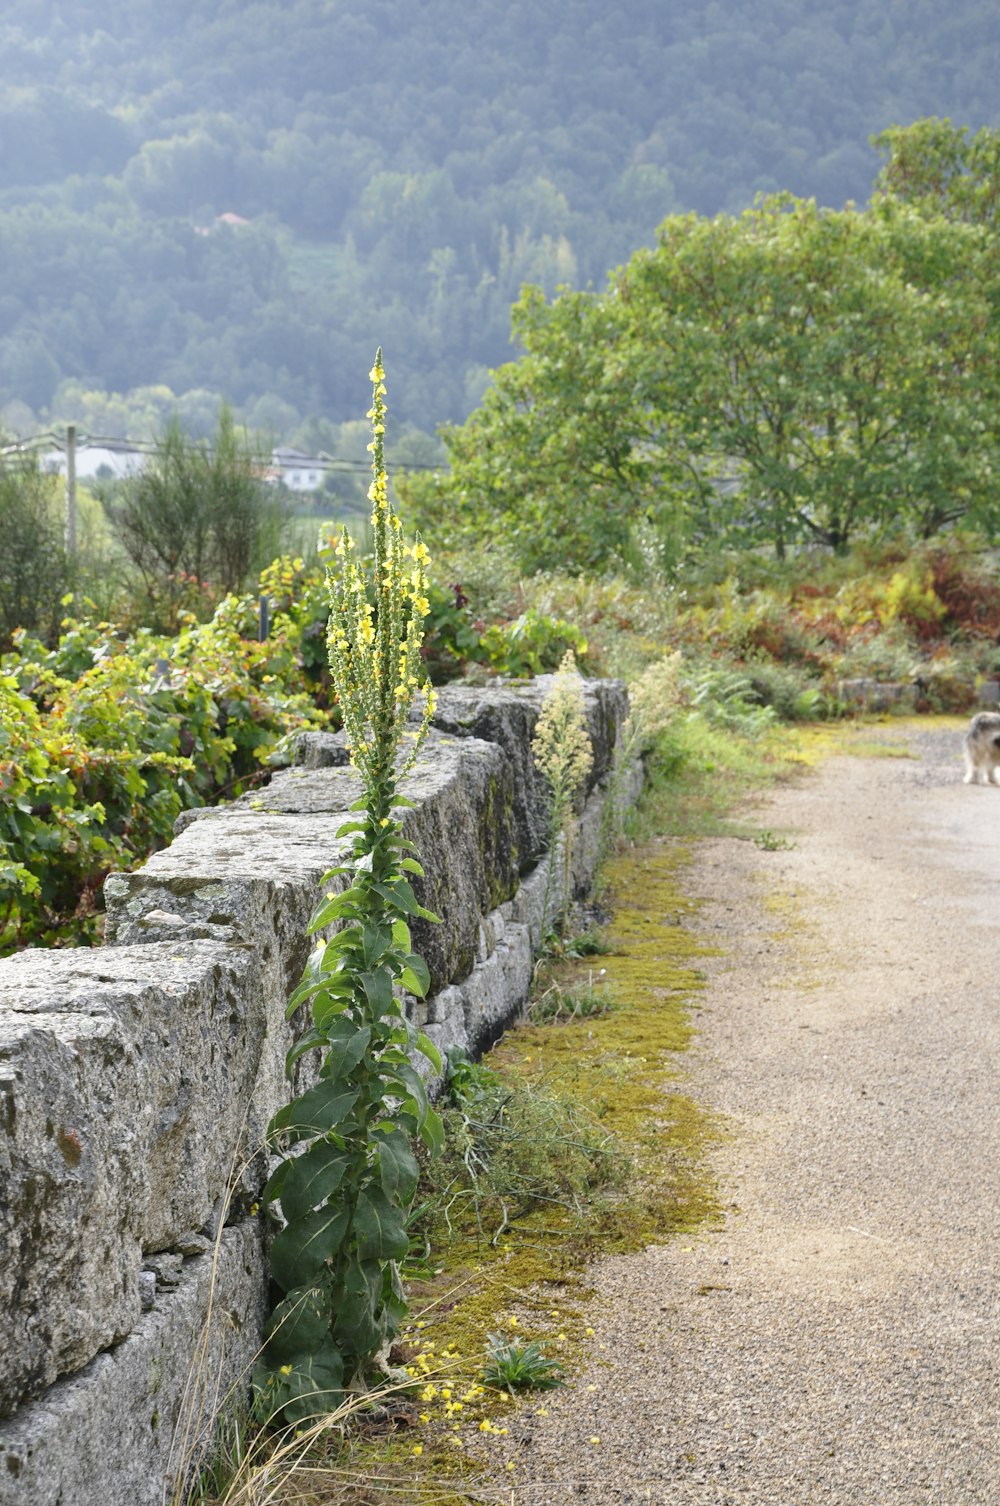 a dog walking down a road next to a stone wall